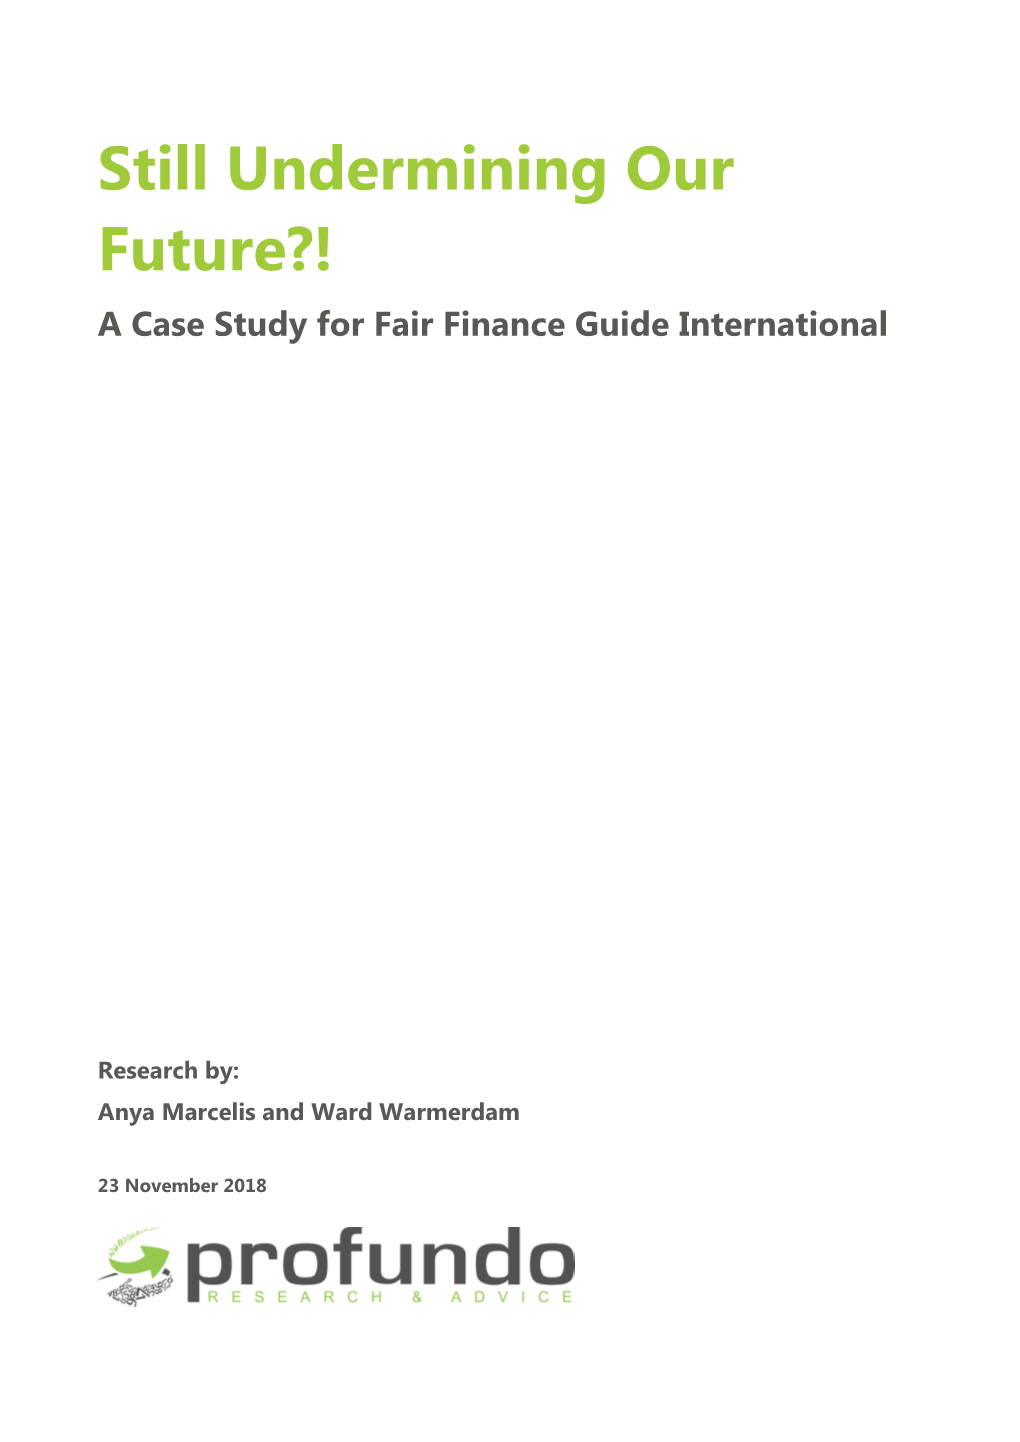 Still Undermining Our Future?! a Case Study for Fair Finance Guide International